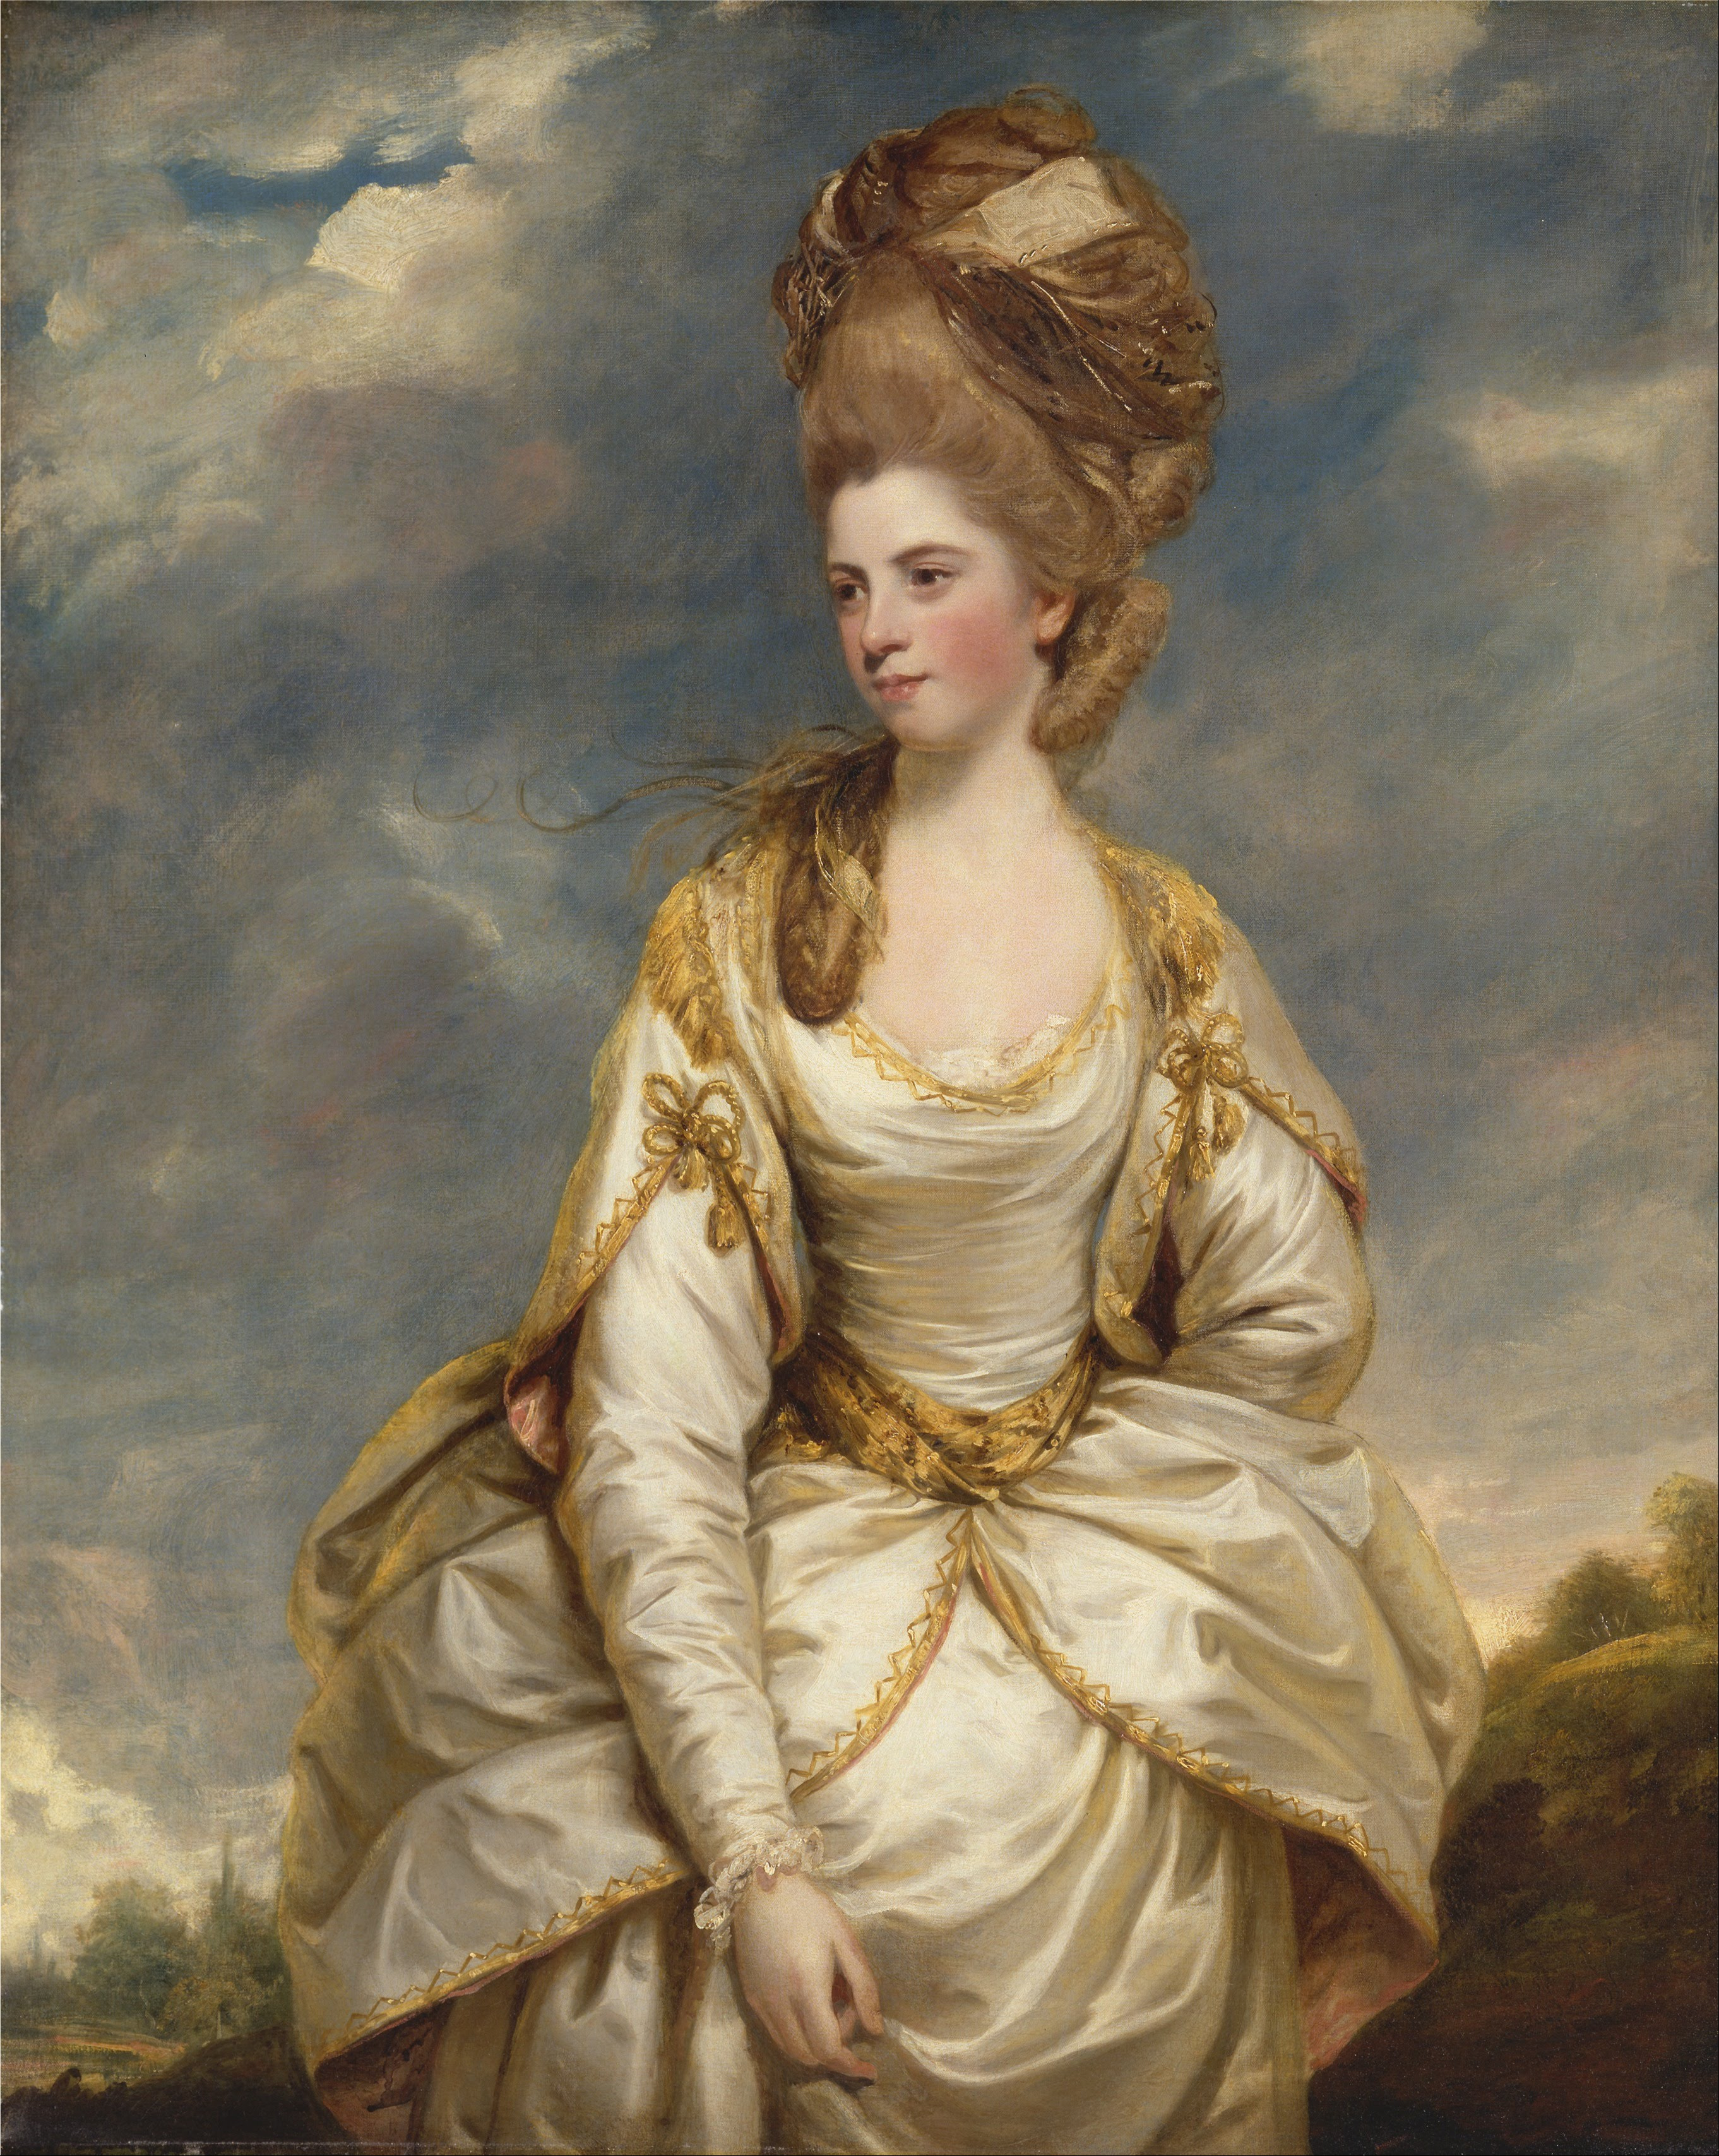 Sarah Campbell by Joshua Reynolds - 1777 to 1778 - 127.6 x 101.6 cm Yale Center for British Art